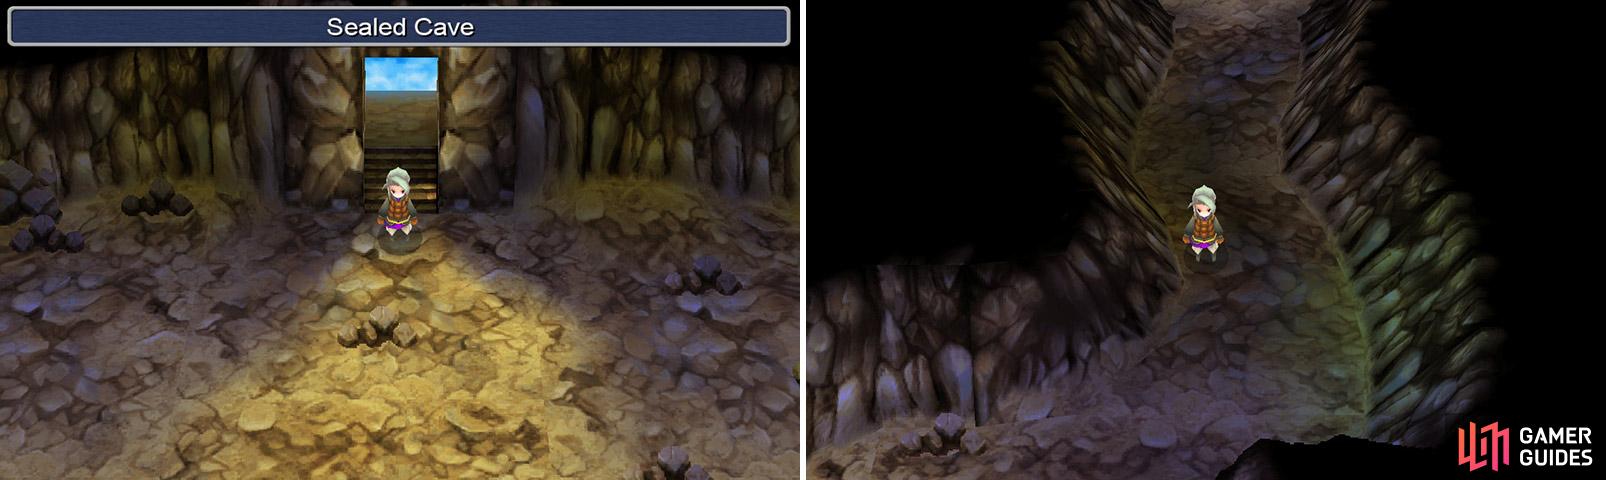 Welcome to Sealed Cave, the next dungeon in this game.